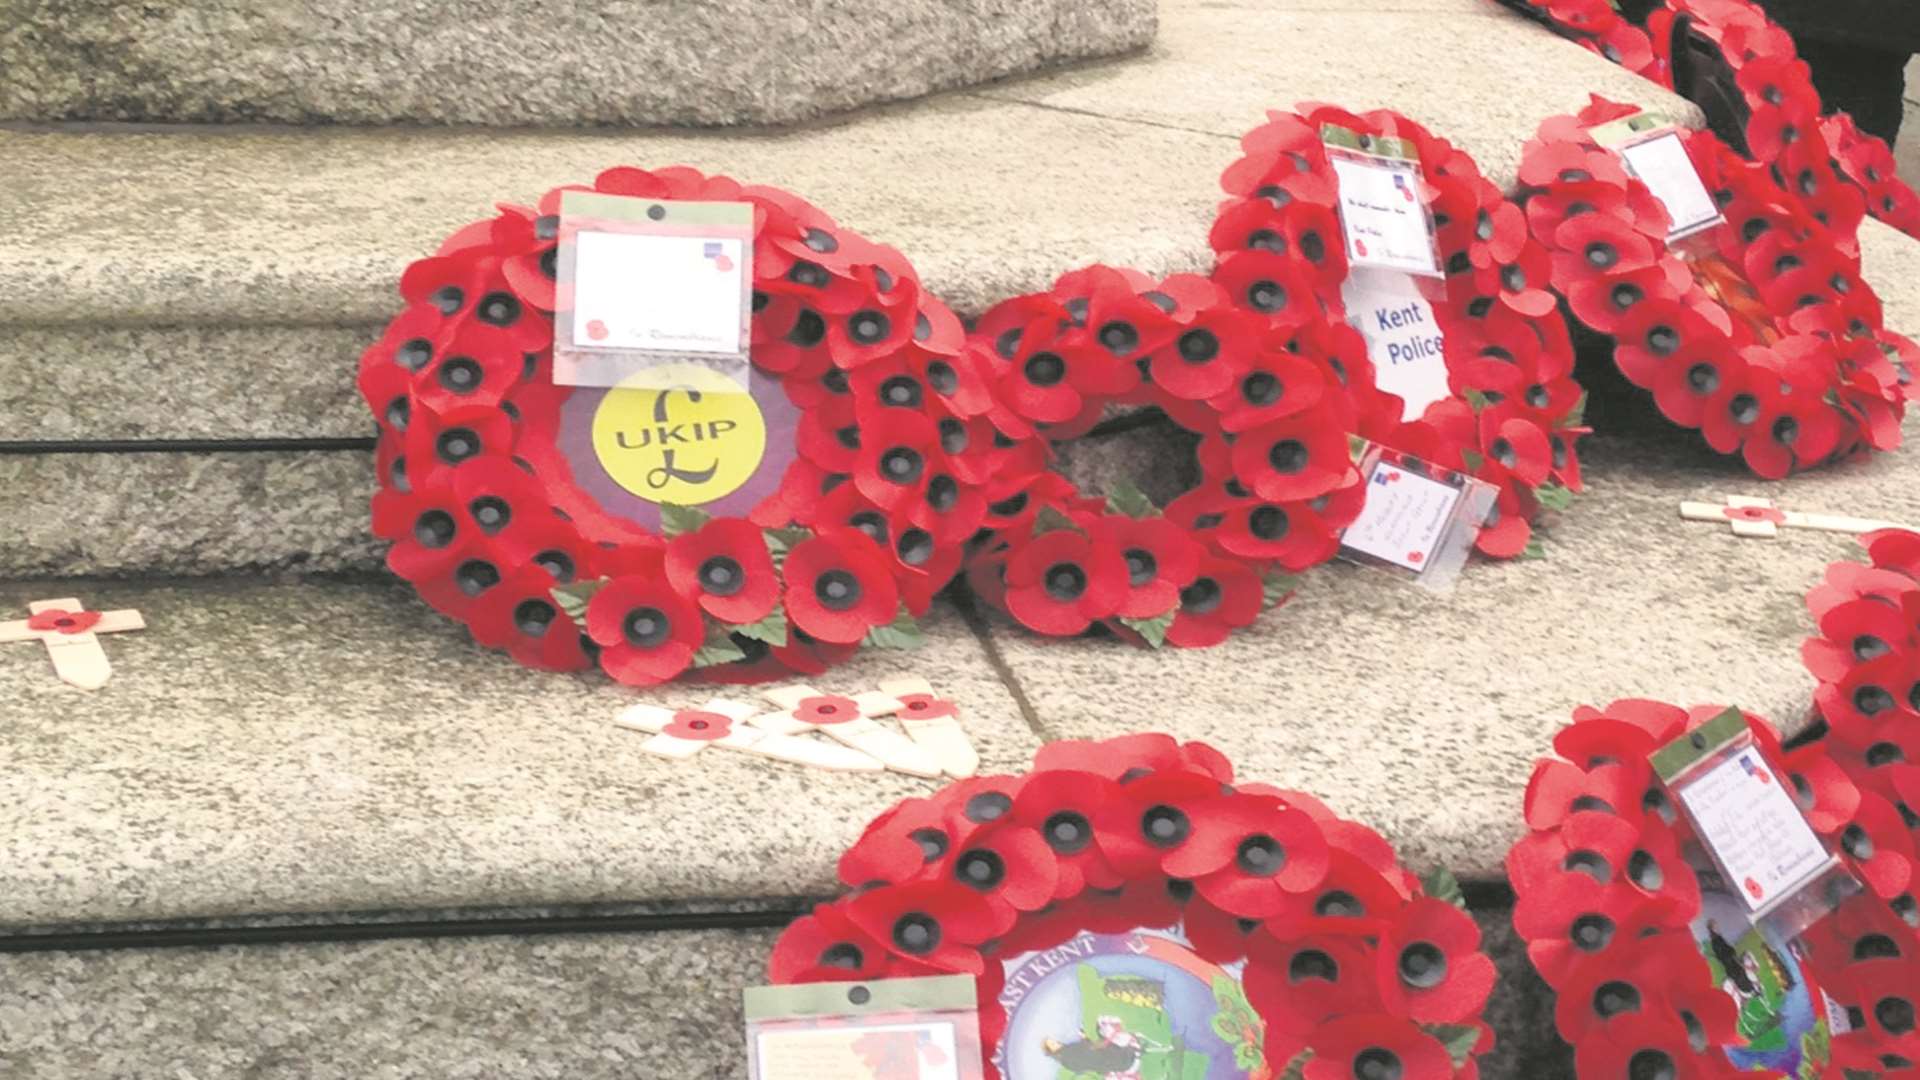 The wreaths laid at the memorial